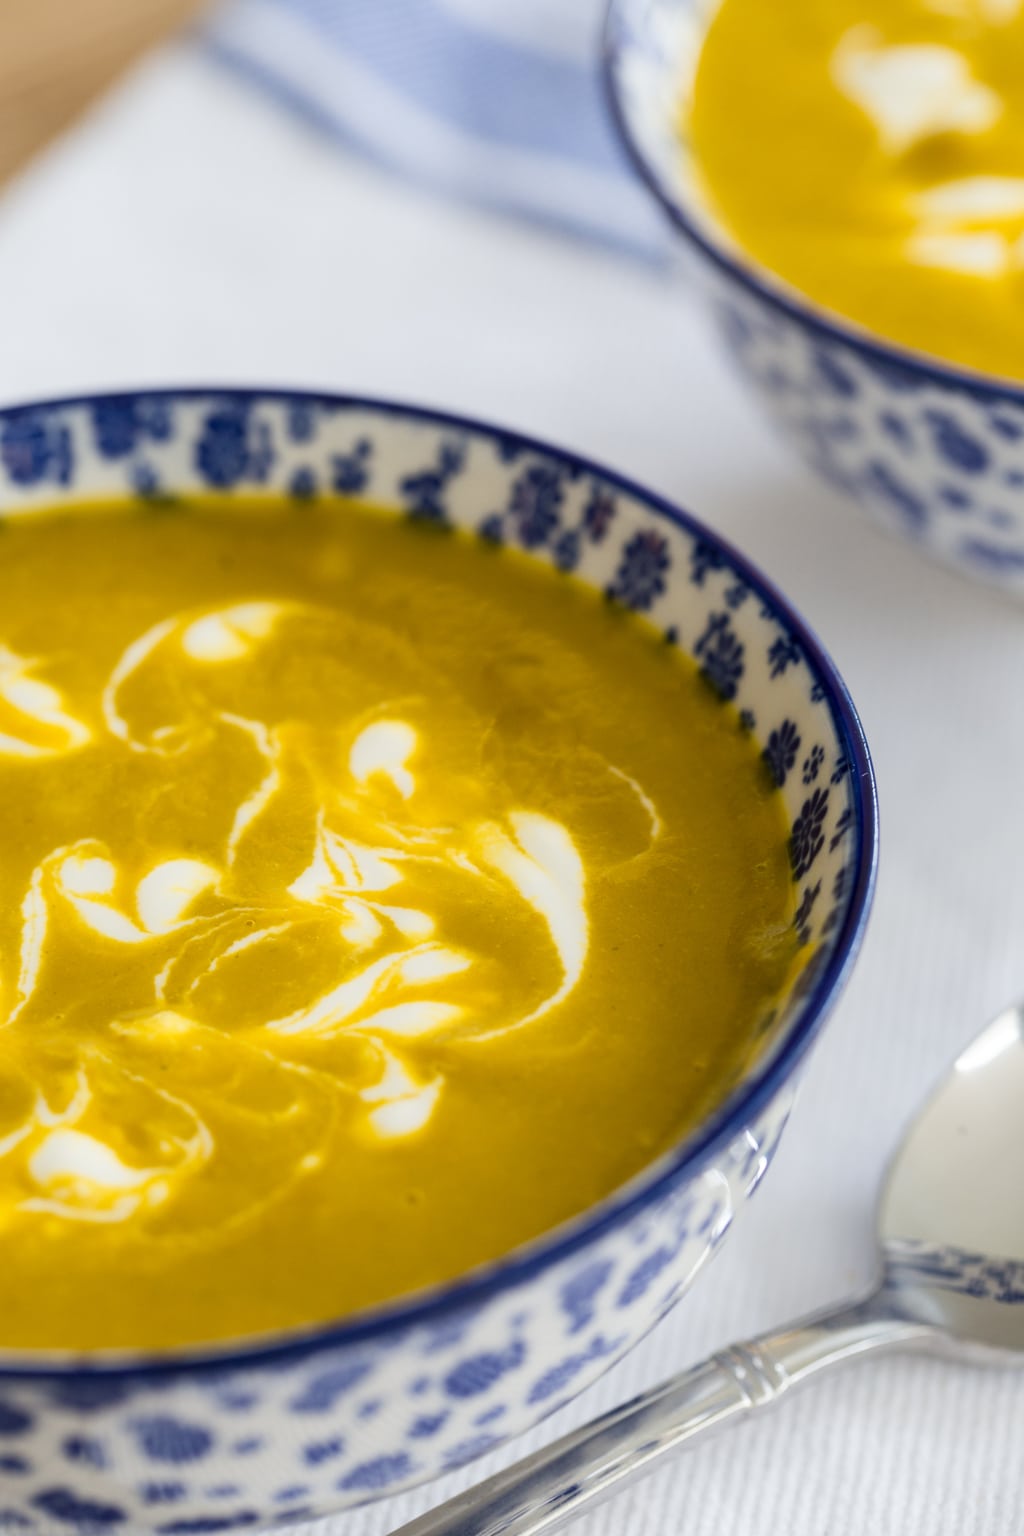 Photo of a bowl of Carrot Coriander Soup on a white and blue napkin.